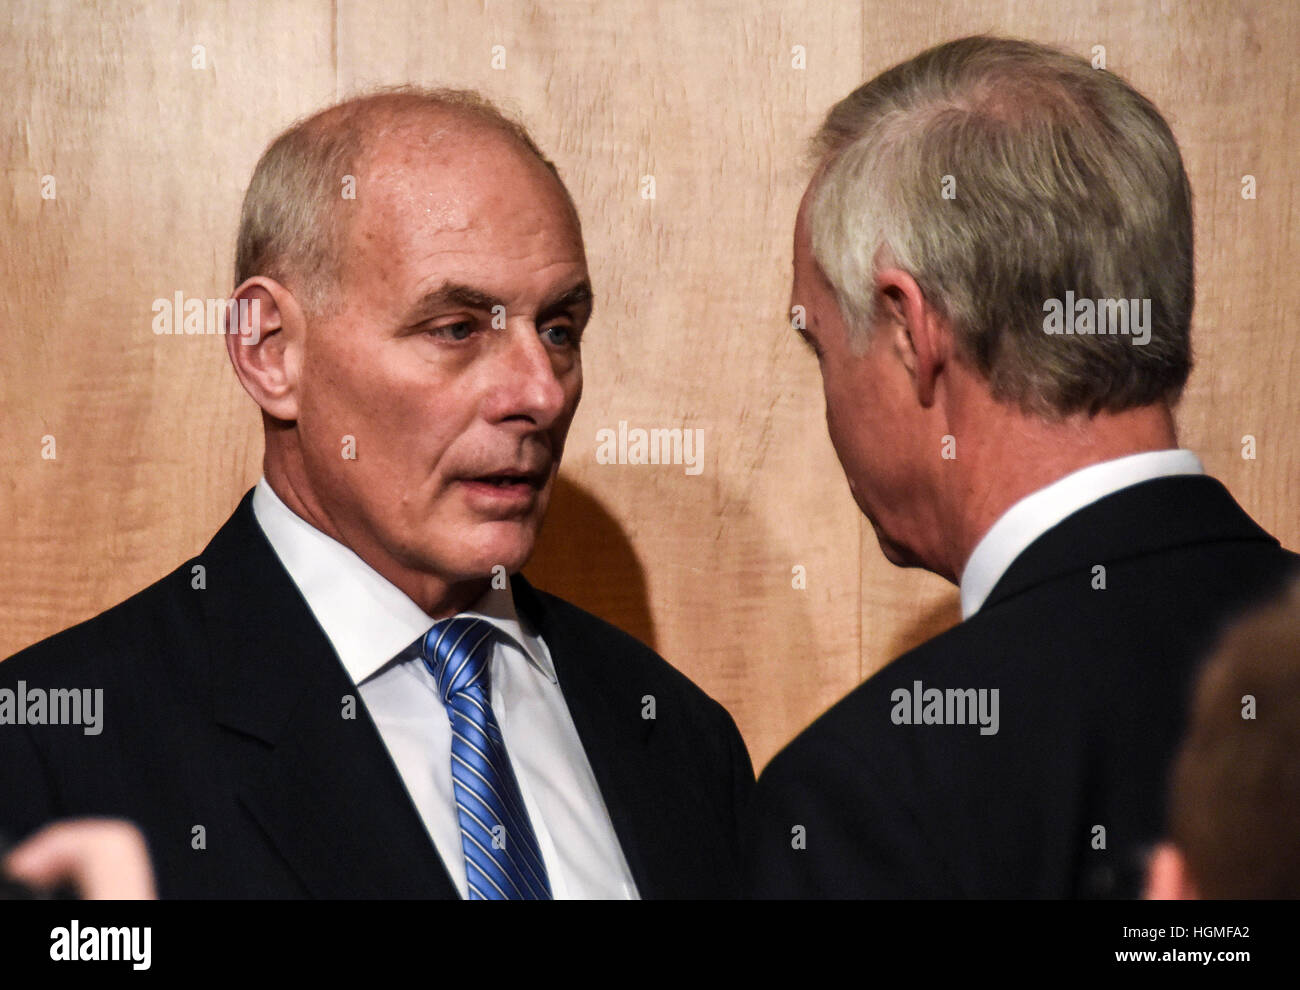 Washington, DC, USA. 10th January, 2017. Retired Marine Corps Gen. John Kelly (L) prepares to testify at the Senate Homeland Security and Governmental Affairs Committee hearing on his nomination to be Secretary of the Department of Homeland Security on Capitol Hill in Washington D.C, USA. © Bao Dandan/Xinhua/Alamy Live News Stock Photo